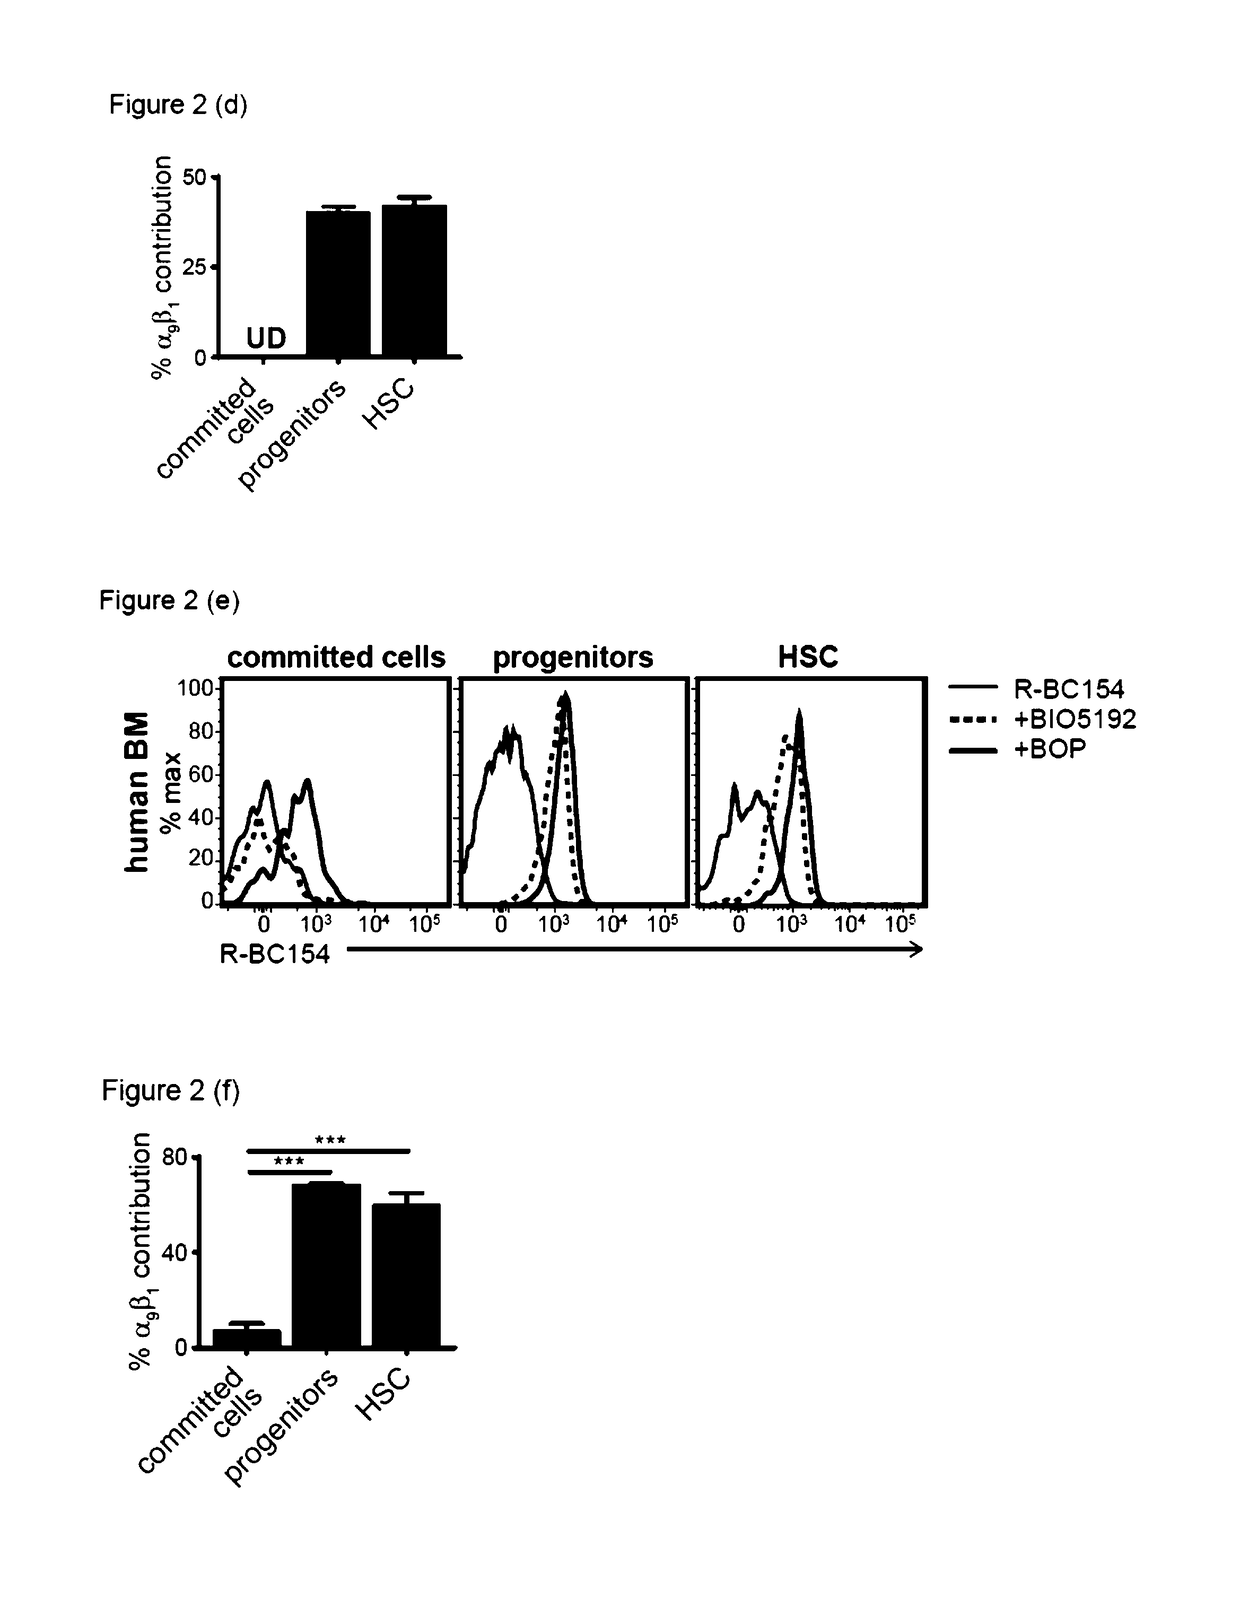 Dislodgement and release of hsc using alpha 9 integrin antagonist and cxcr4 antagonist